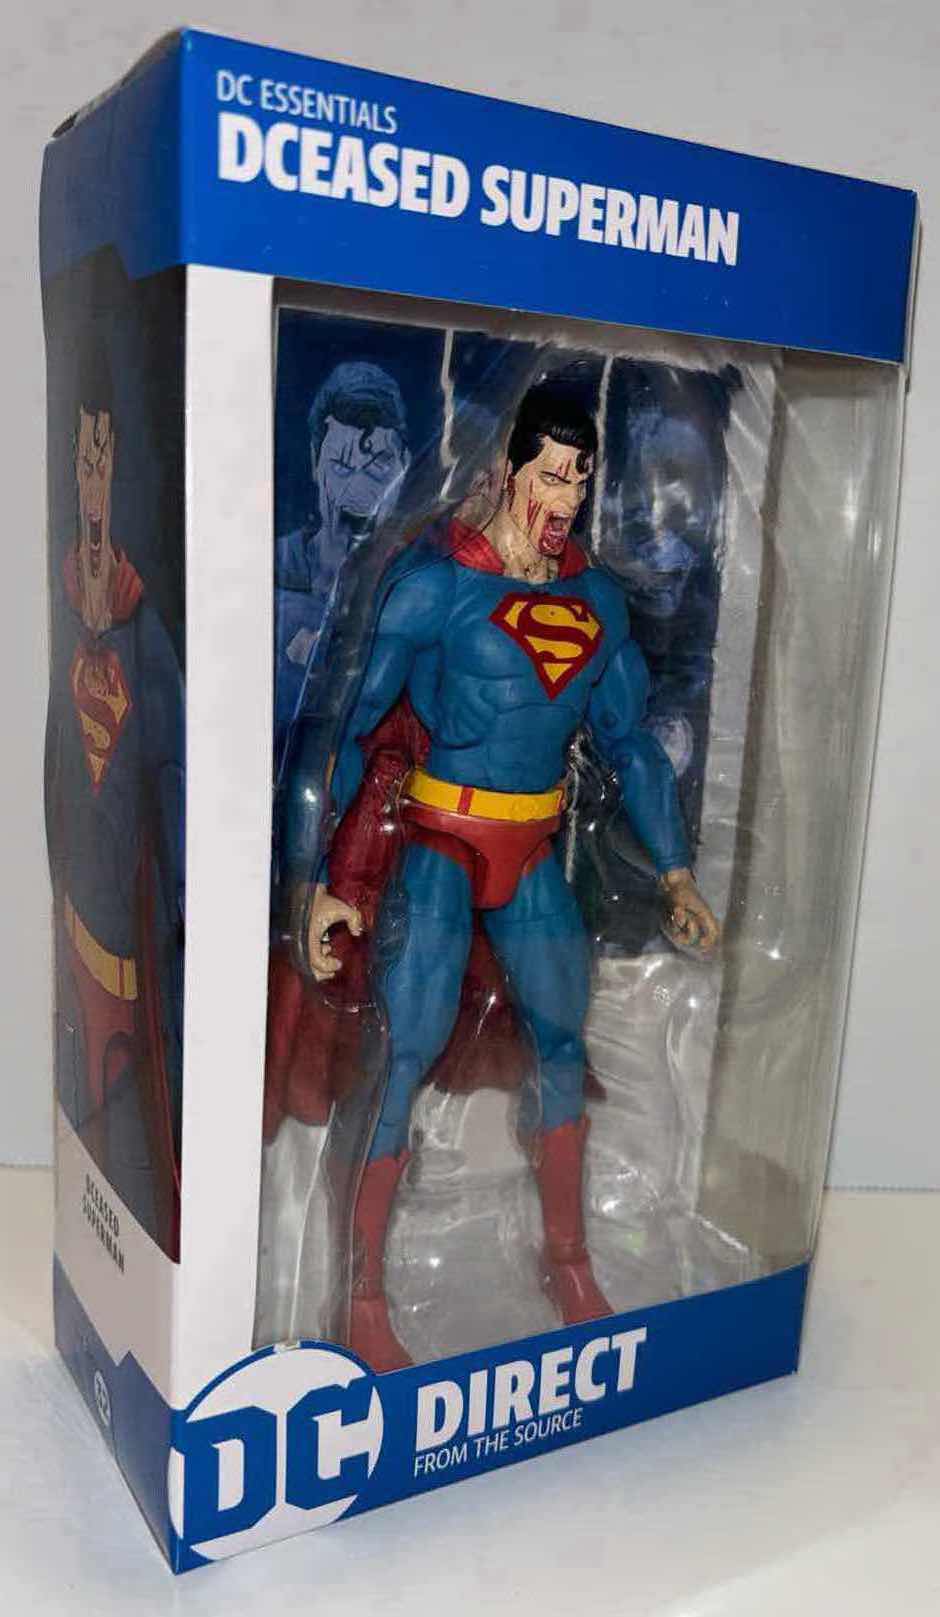 Photo 1 of NEW DC DIRECT DC ESSENTIALS ACTION FIGURE, #32 “DCEASED SUPERMAN” (1)